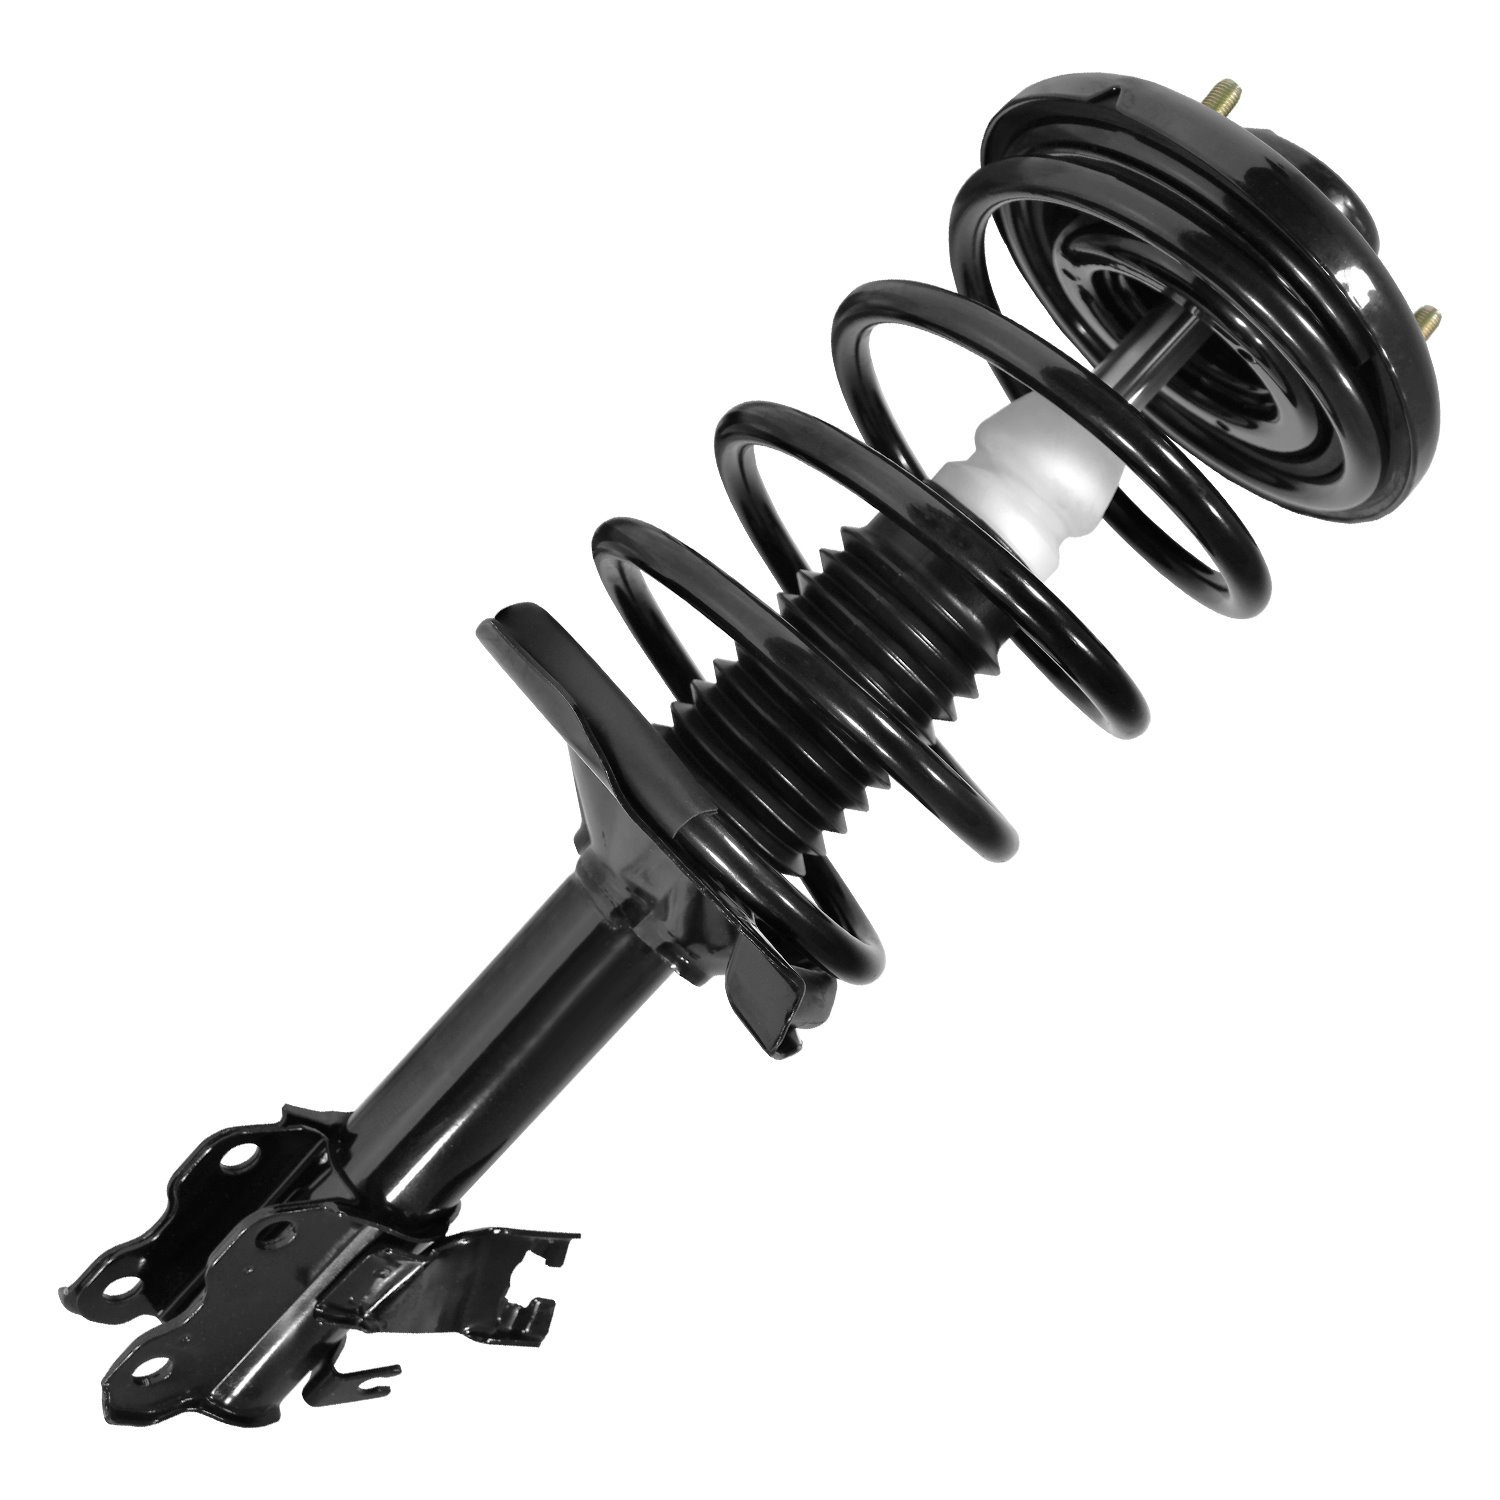 11944 Suspension Strut & Coil Spring Assembly Fits Select Nissan Maxima, Infiniti I35